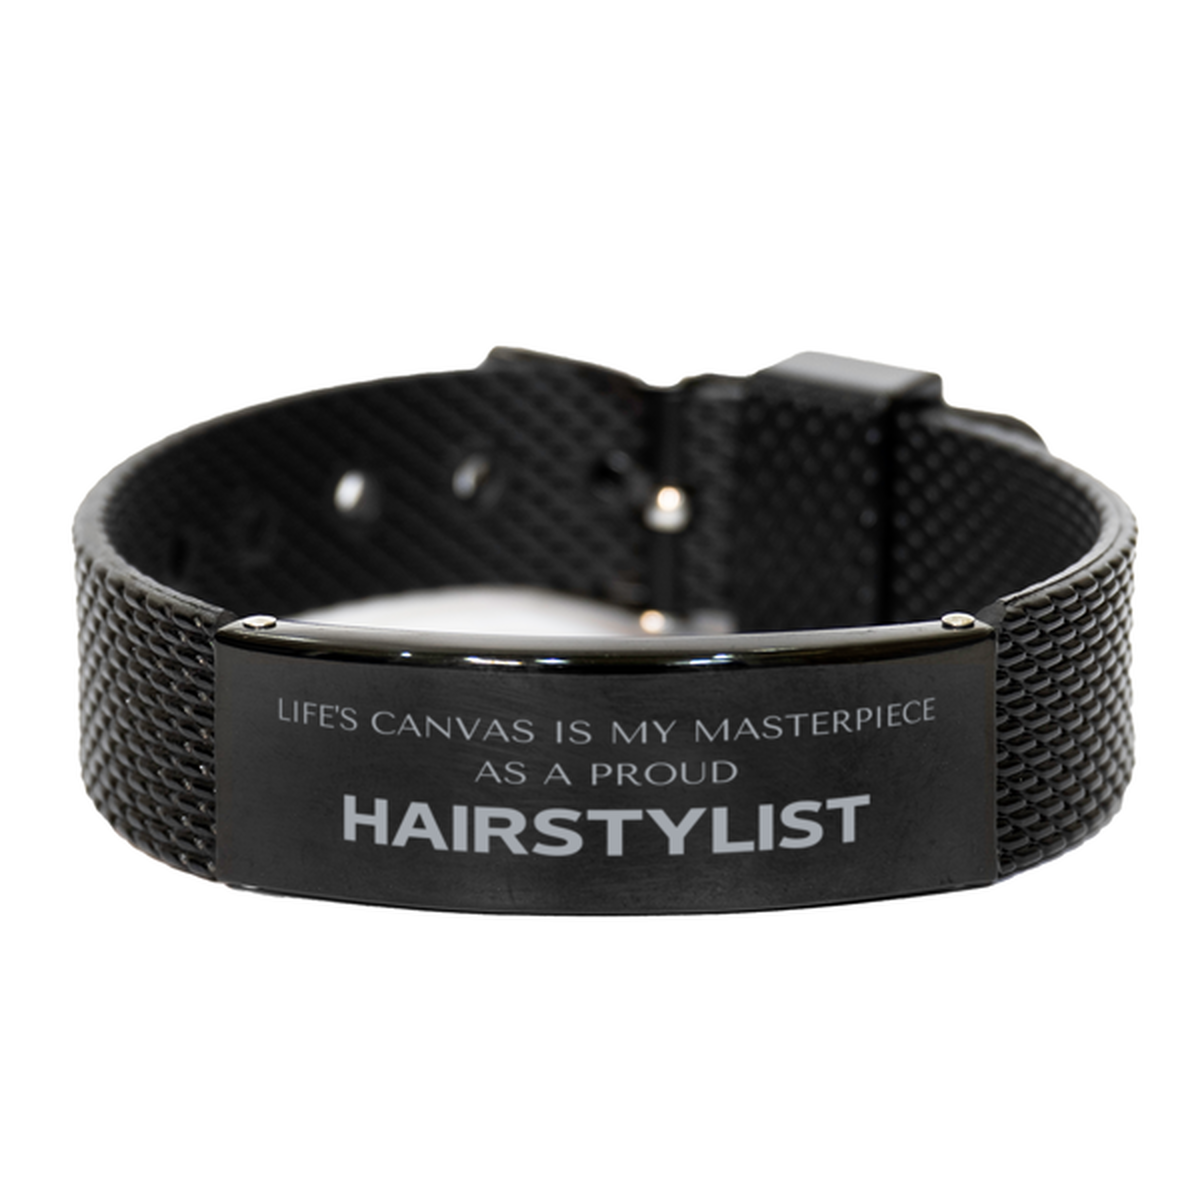 Proud Hairstylist Gifts, Life's canvas is my masterpiece, Epic Birthday Christmas Unique Black Shark Mesh Bracelet For Hairstylist, Coworkers, Men, Women, Friends